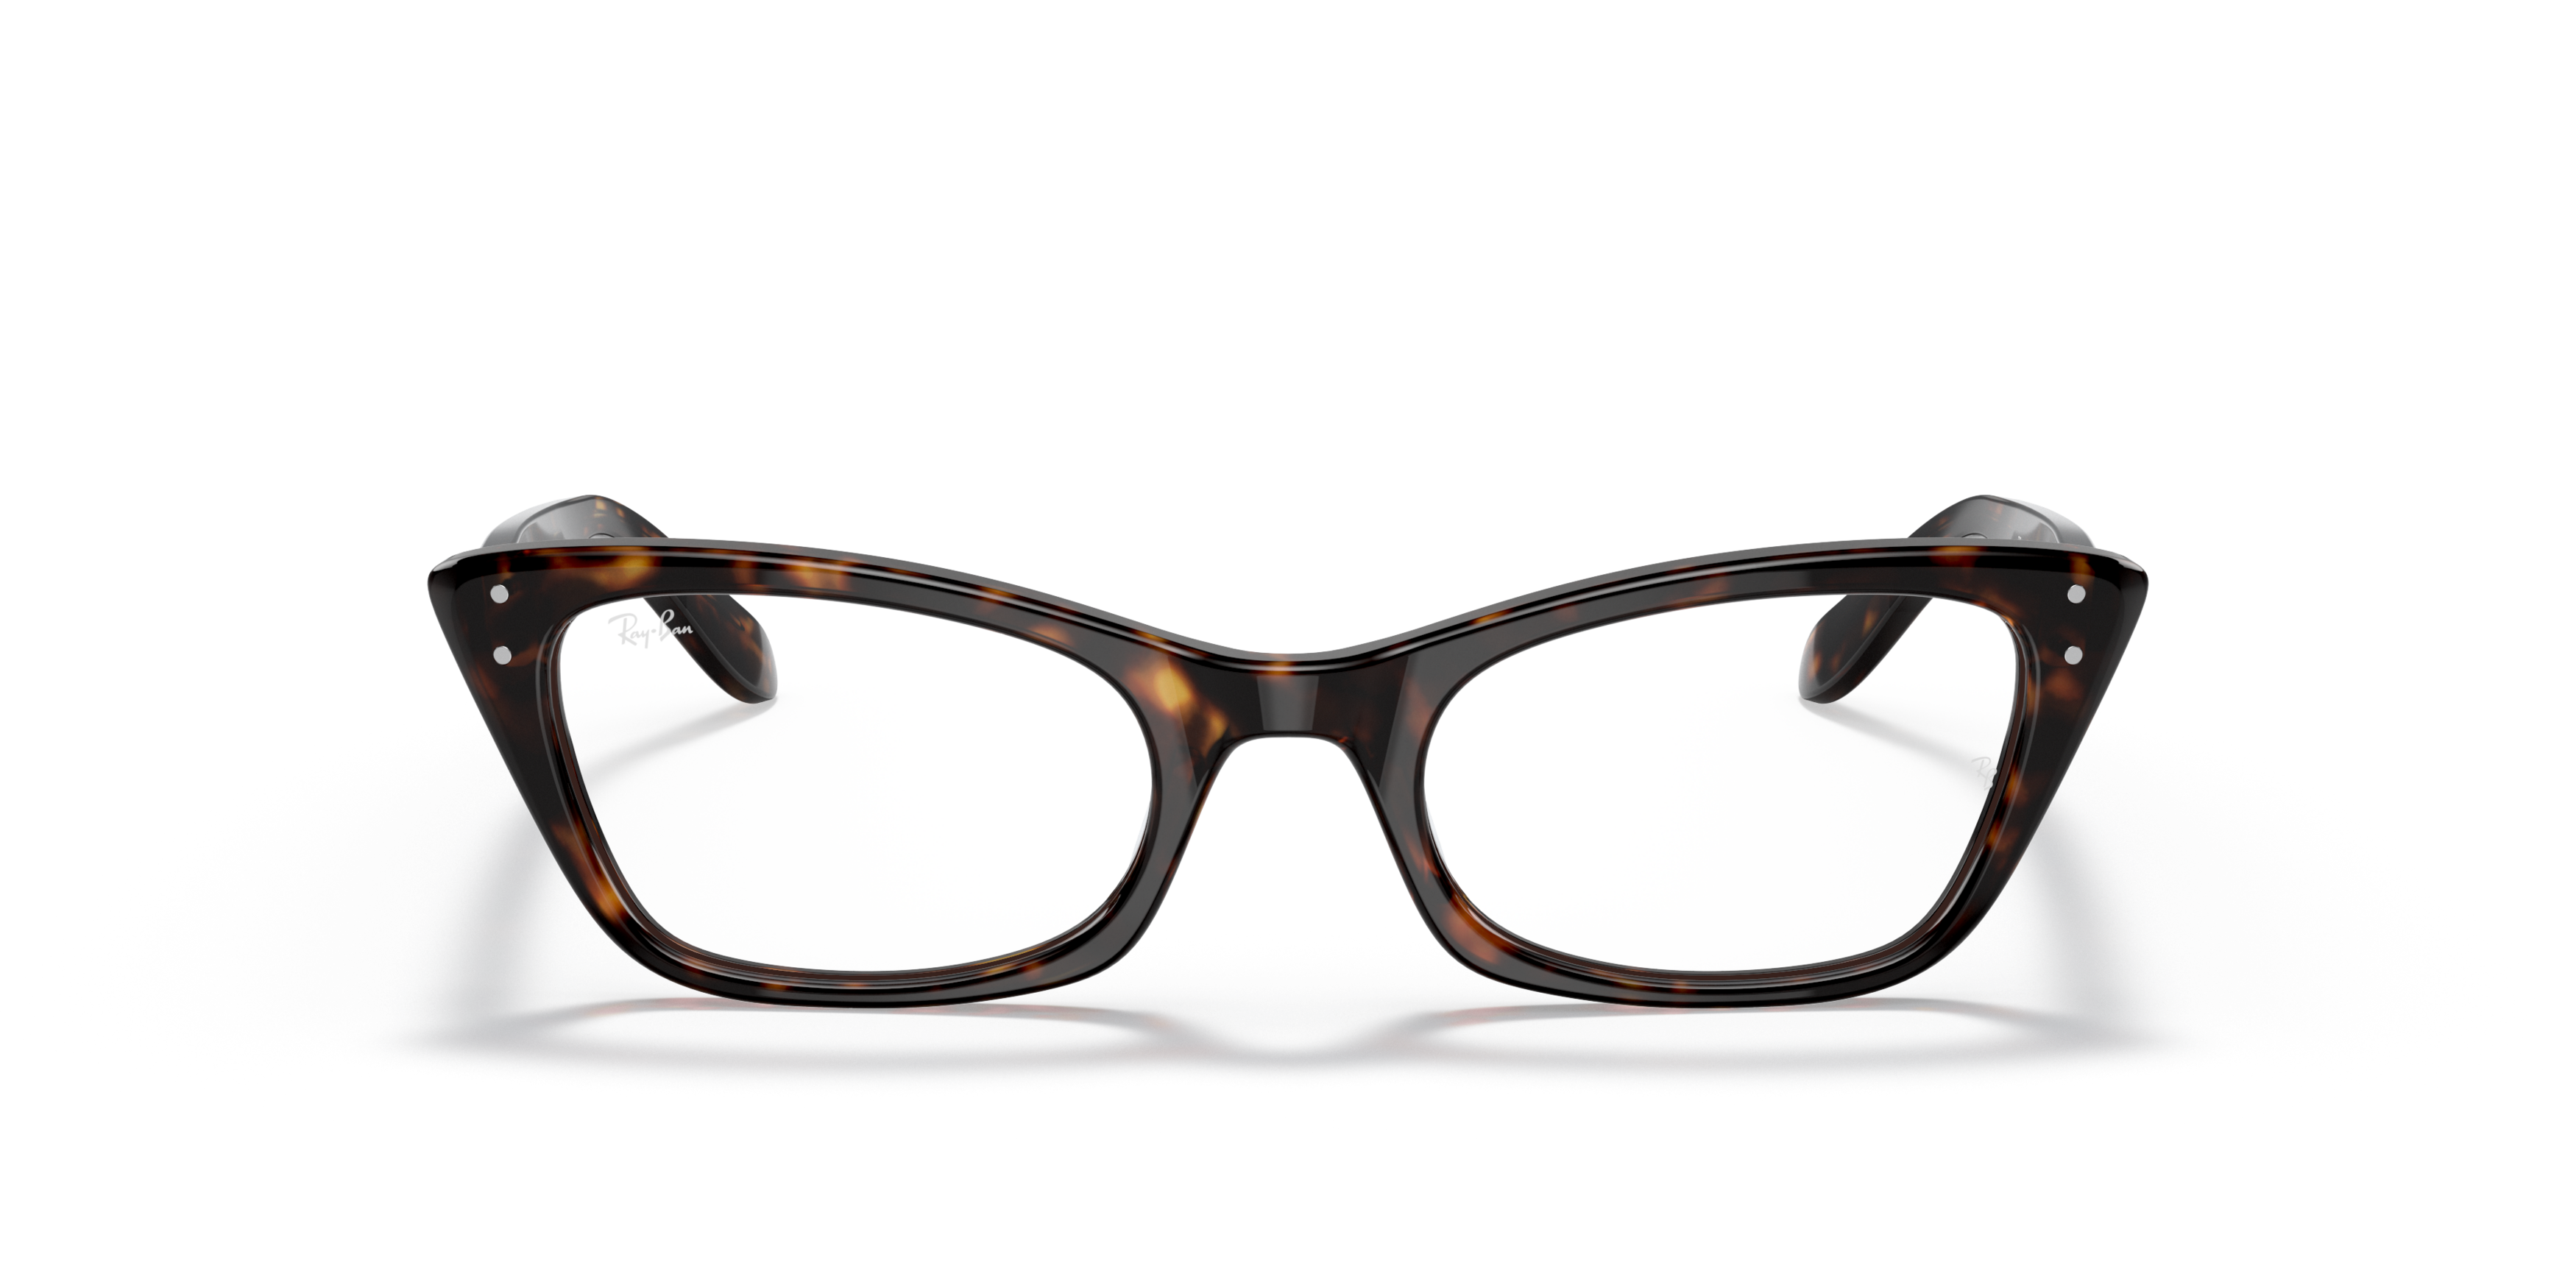 Front Ray-Ban Lady RX 5499 (2012) Glasses Transparent / Tortoise Shell